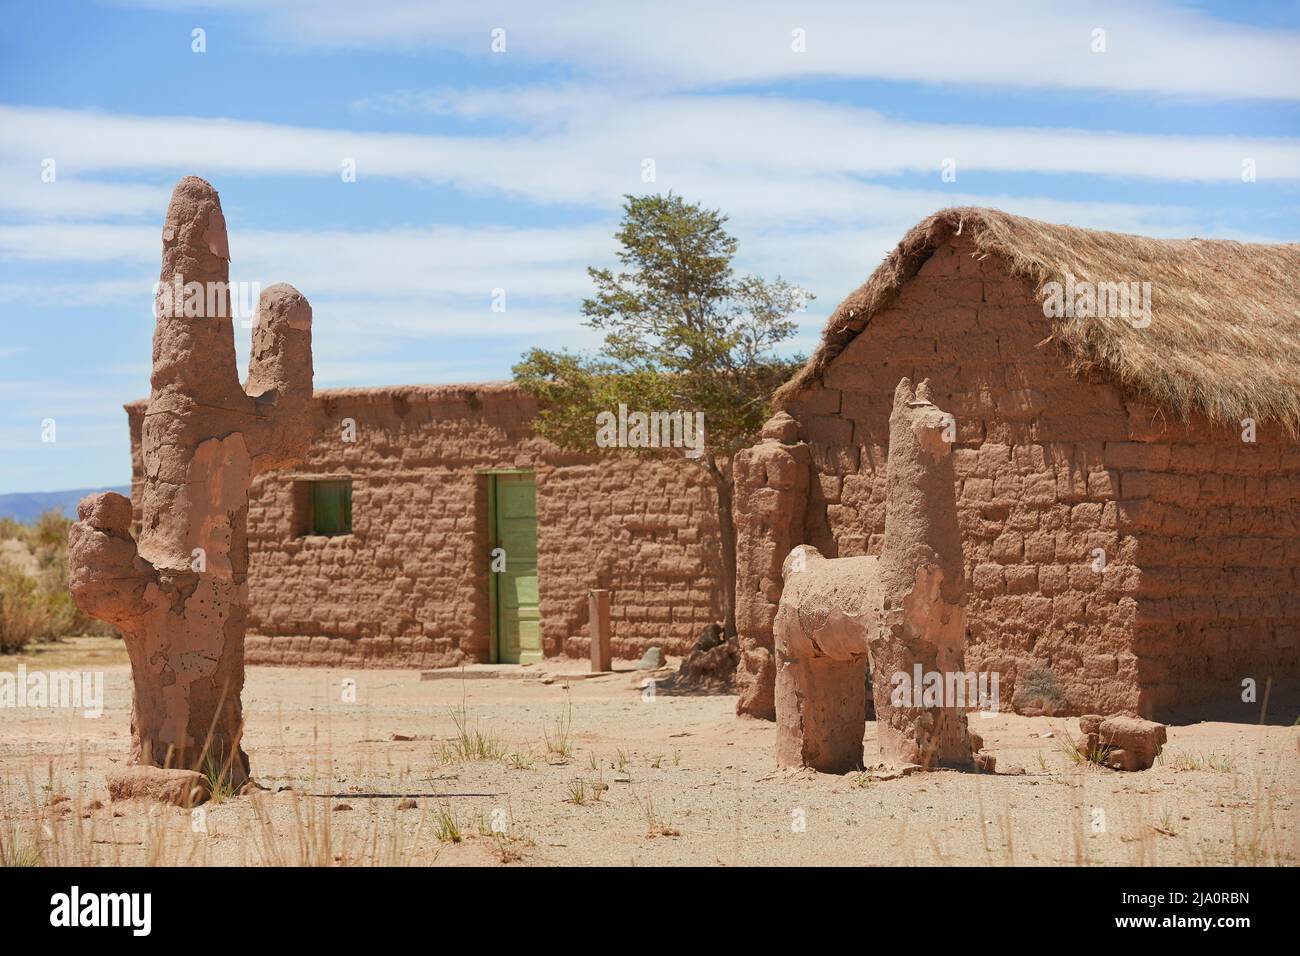 A traditional house made of mud with sculptures of a llama and a cactus. Santuario Tres Pozos, near the 'Salinas Grandes', Jujuy province, Argentina. Stock Photo